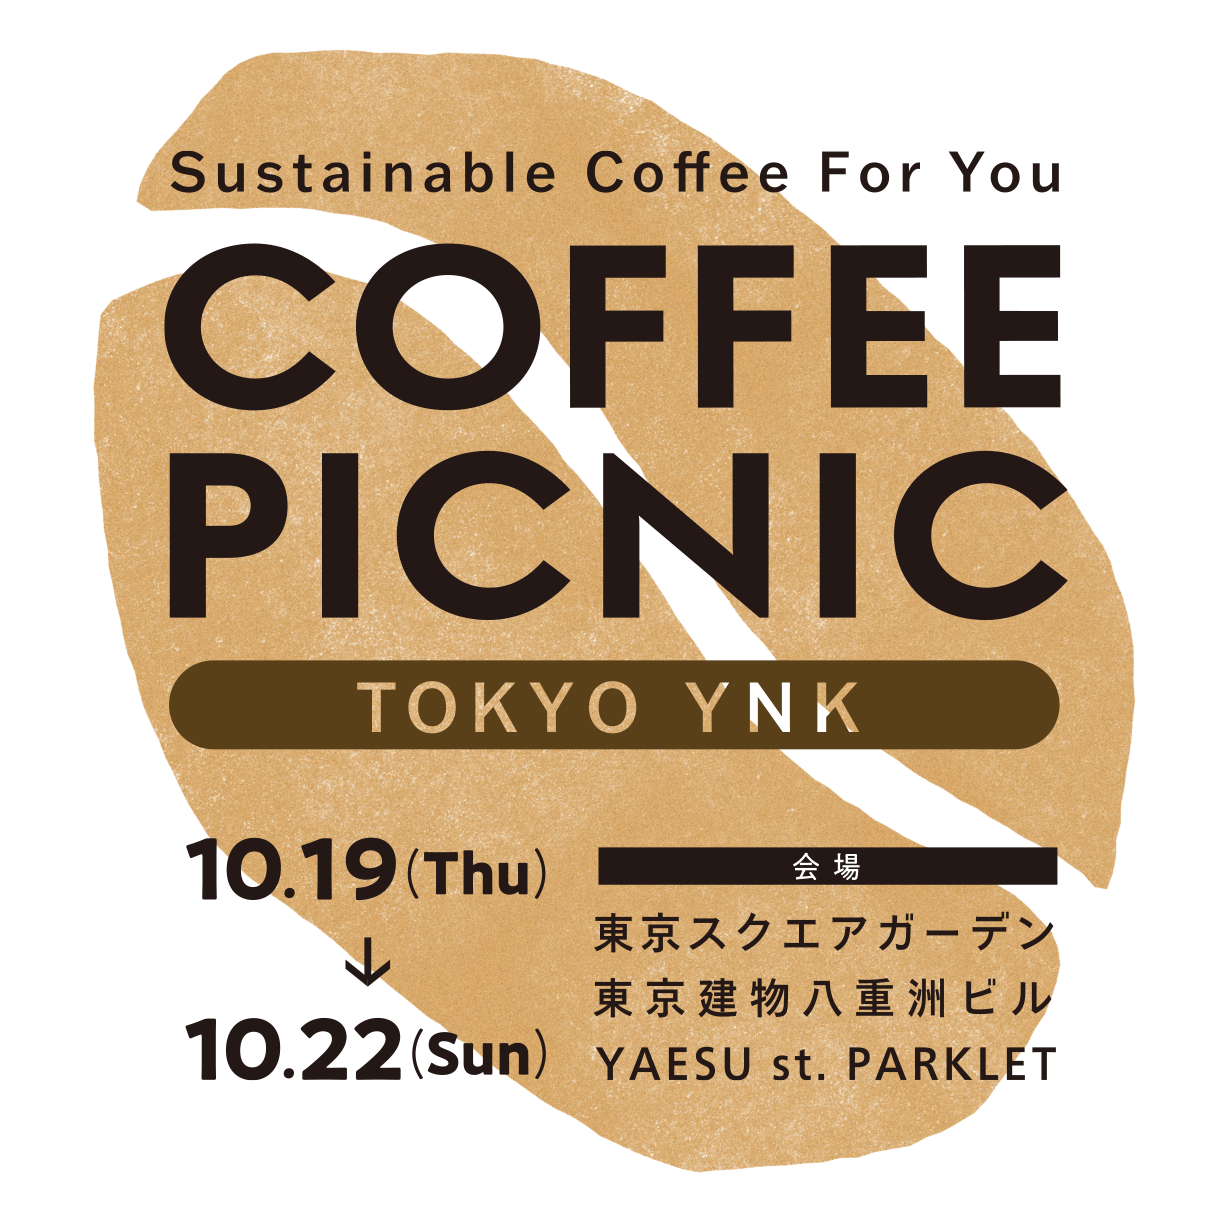 Sustainable Coffee For You COFFEE PICNIC | TOKYO YNK